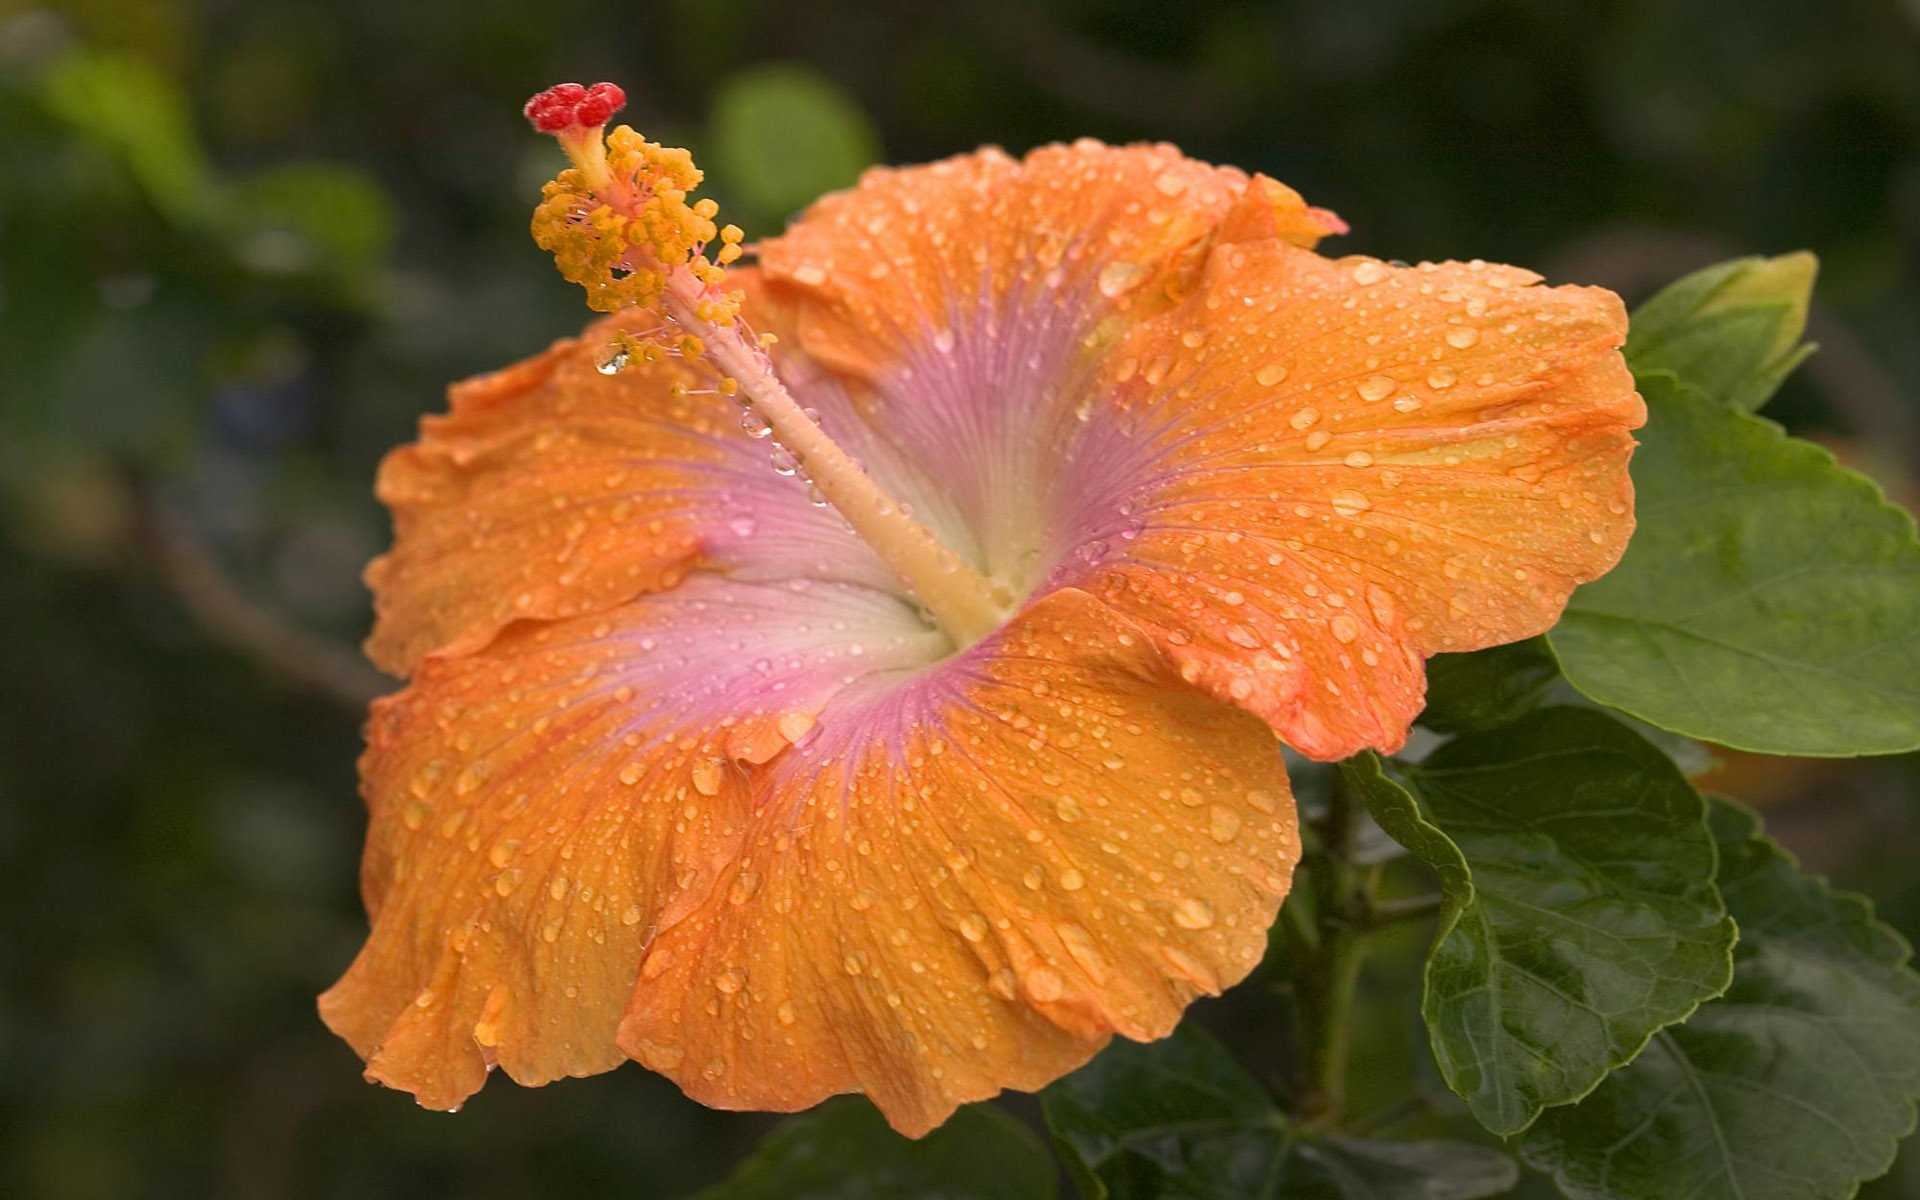 Hibiscus wallpapers, Vibrant pictures, Stunning images, Natural beauty, 1920x1200 HD Desktop